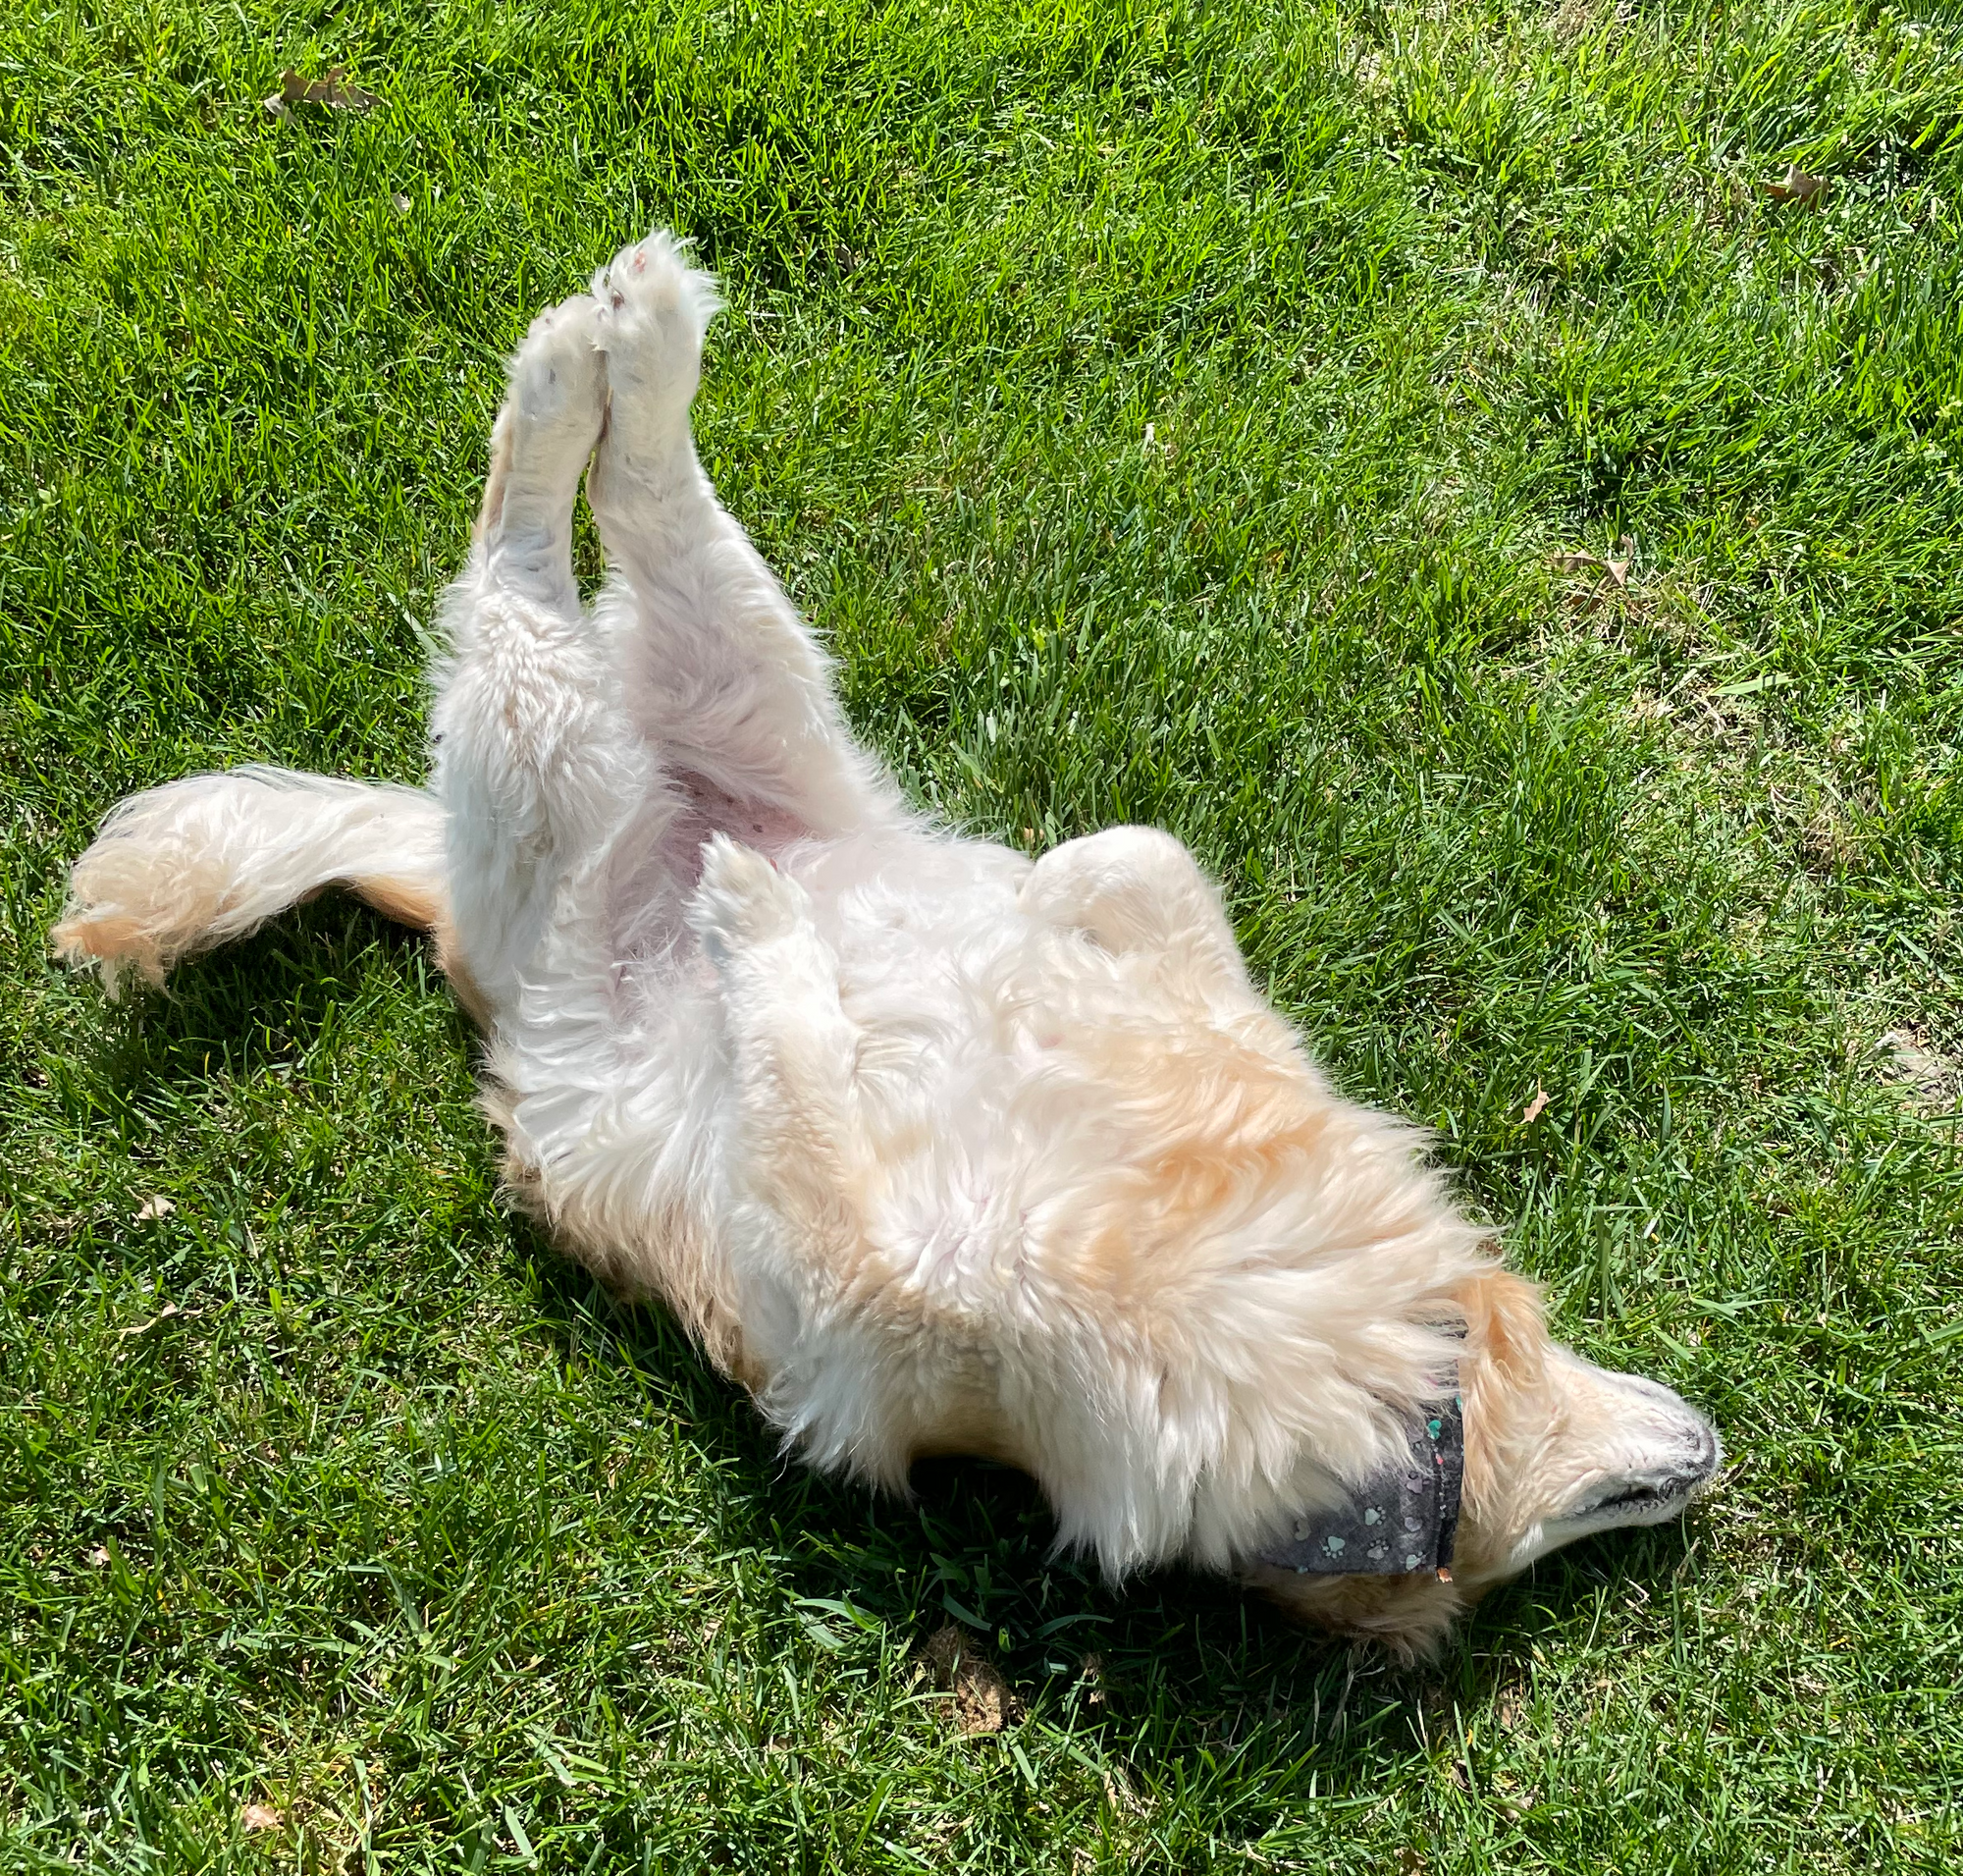 Corgi-Golden mix rolls on lawn of green grass, all four paws up in the air.